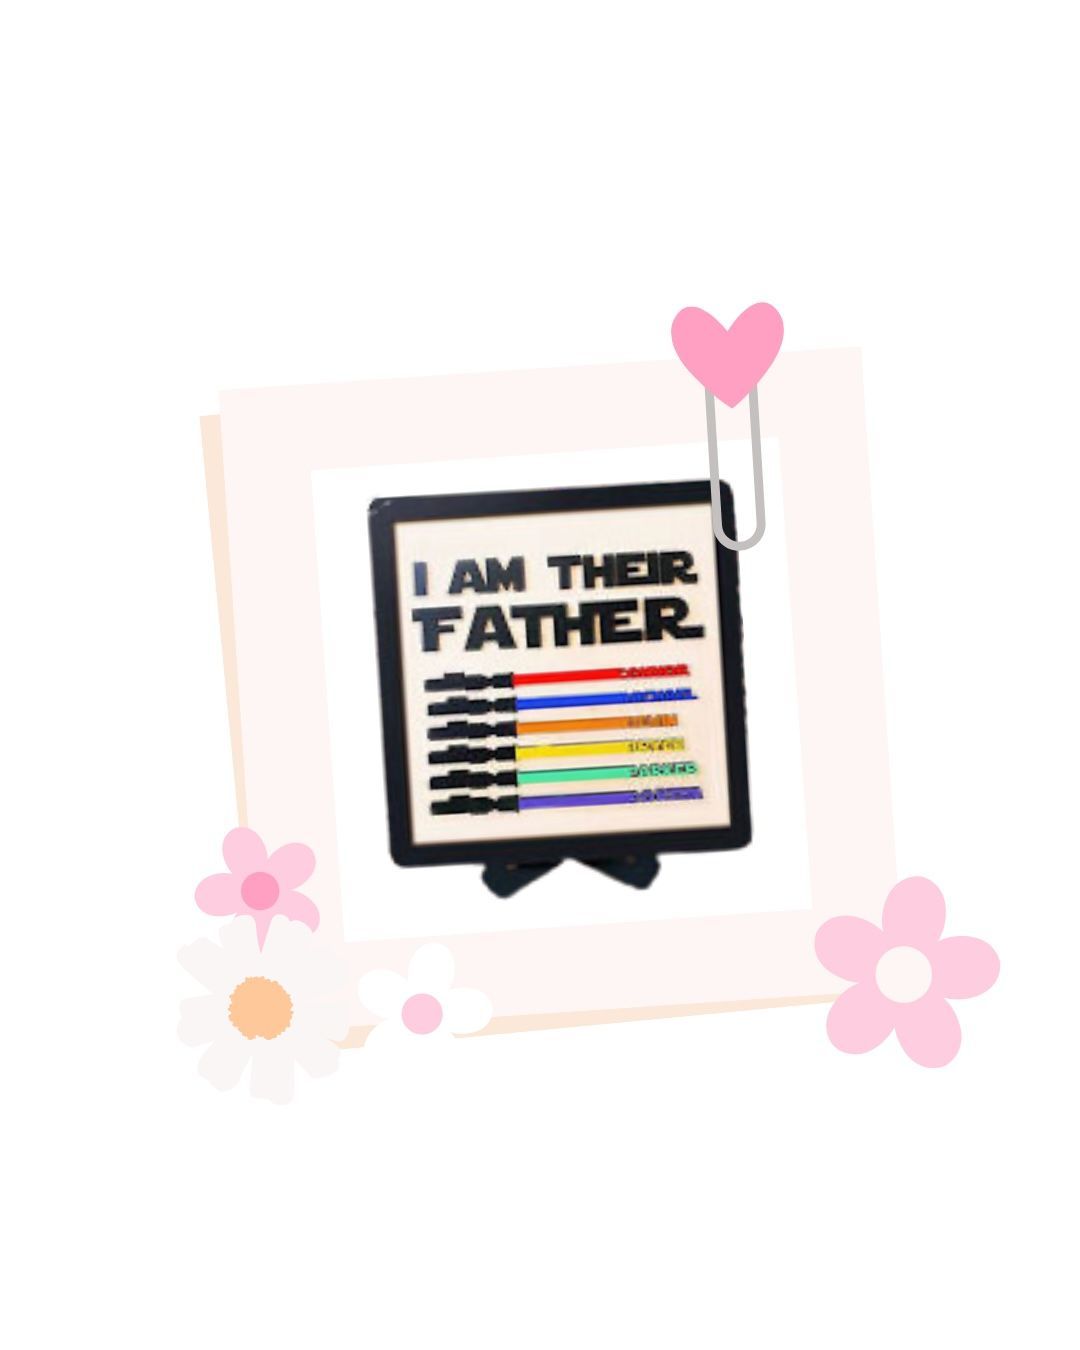 I am your Father gift plaque